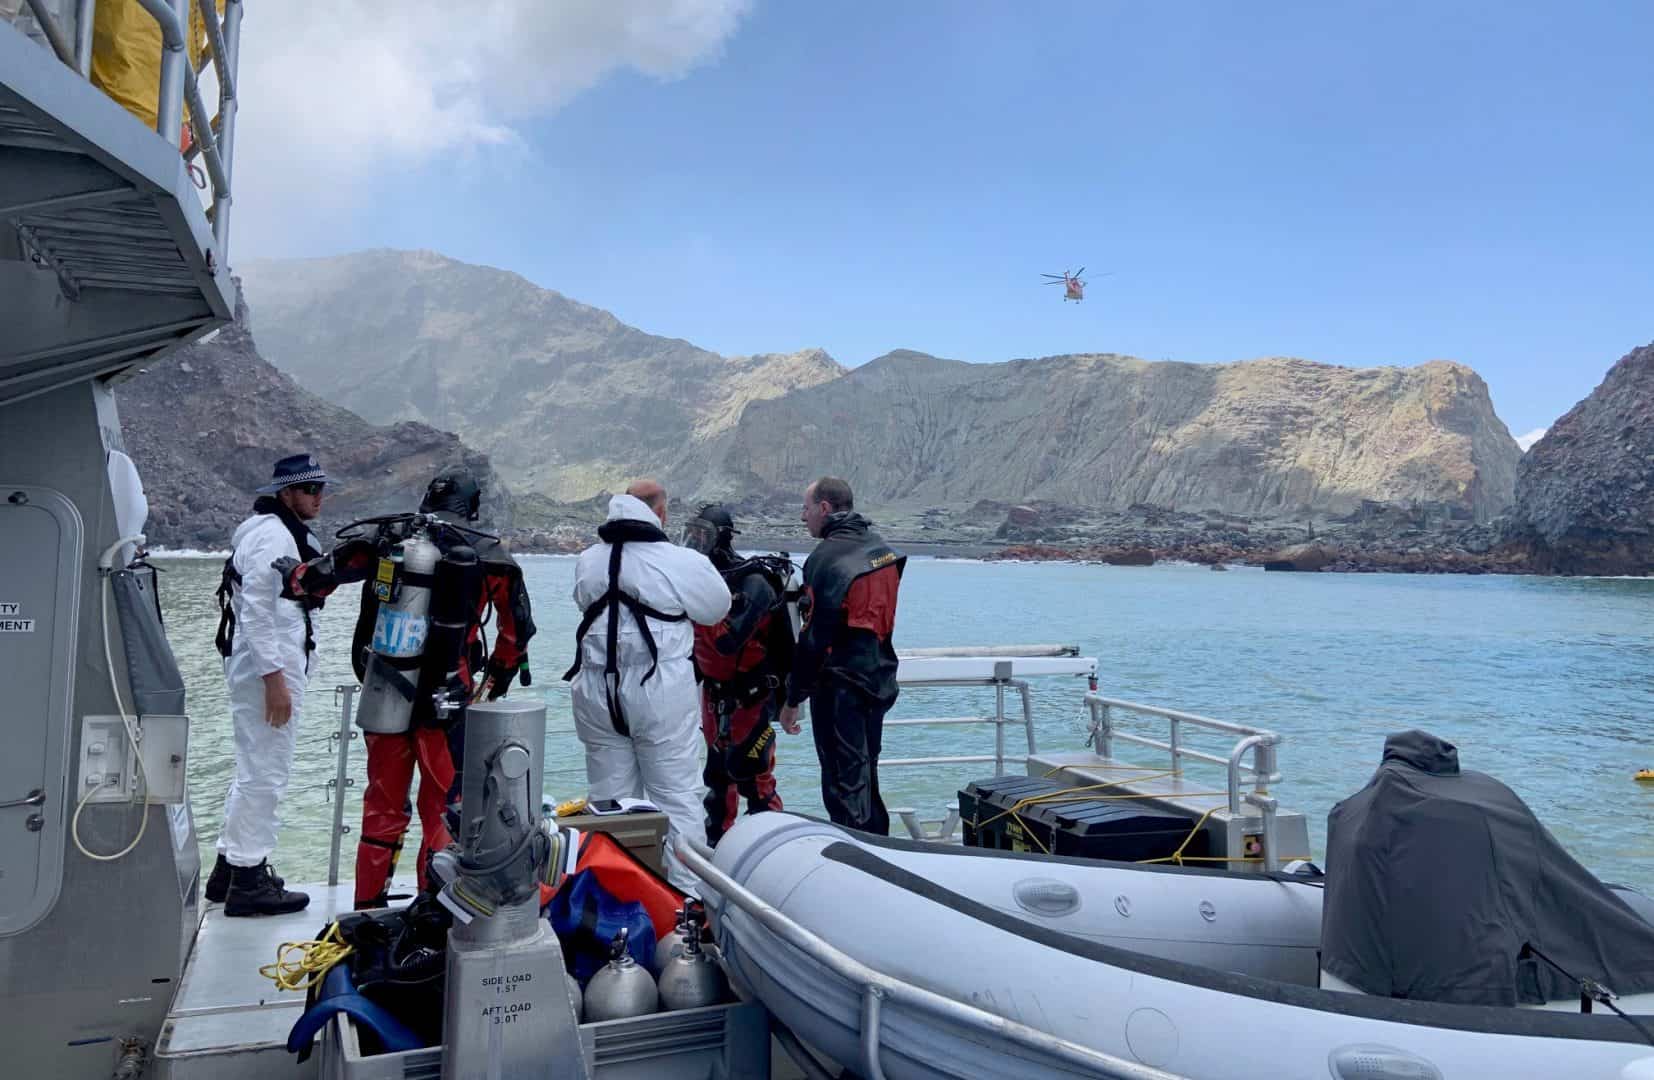 First New Zealand volcano victim named amid grim discoveries by divers